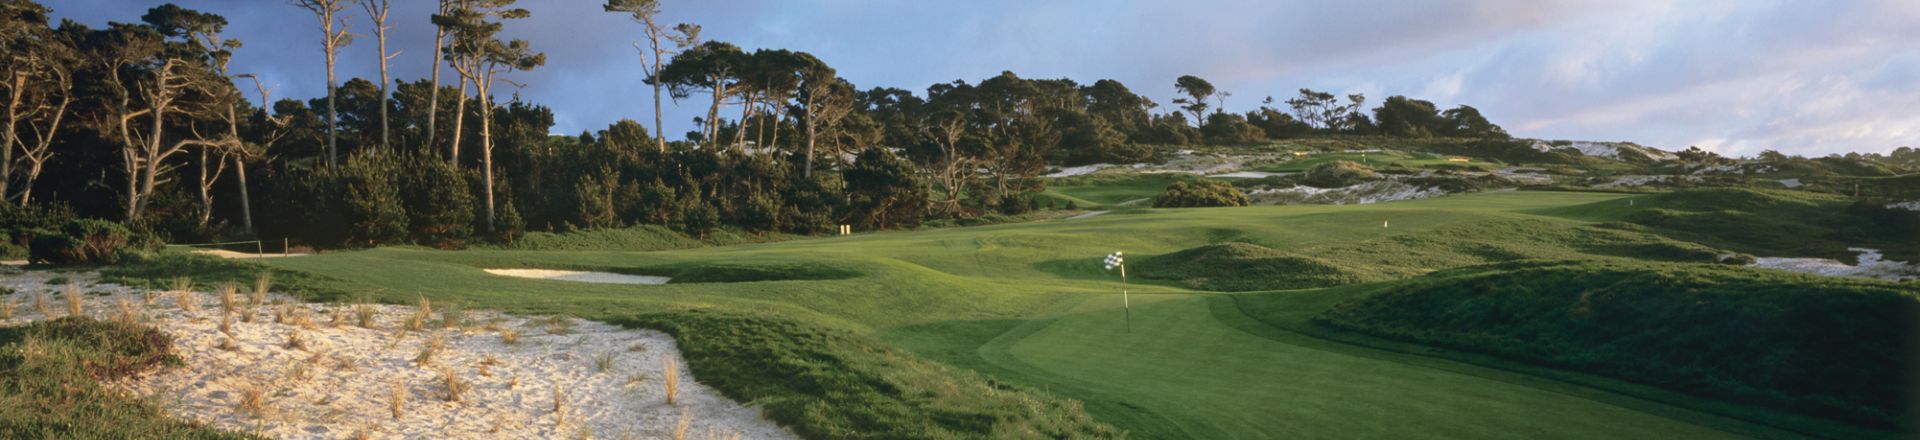 Golf in America at Spyglass Hill Golf Course